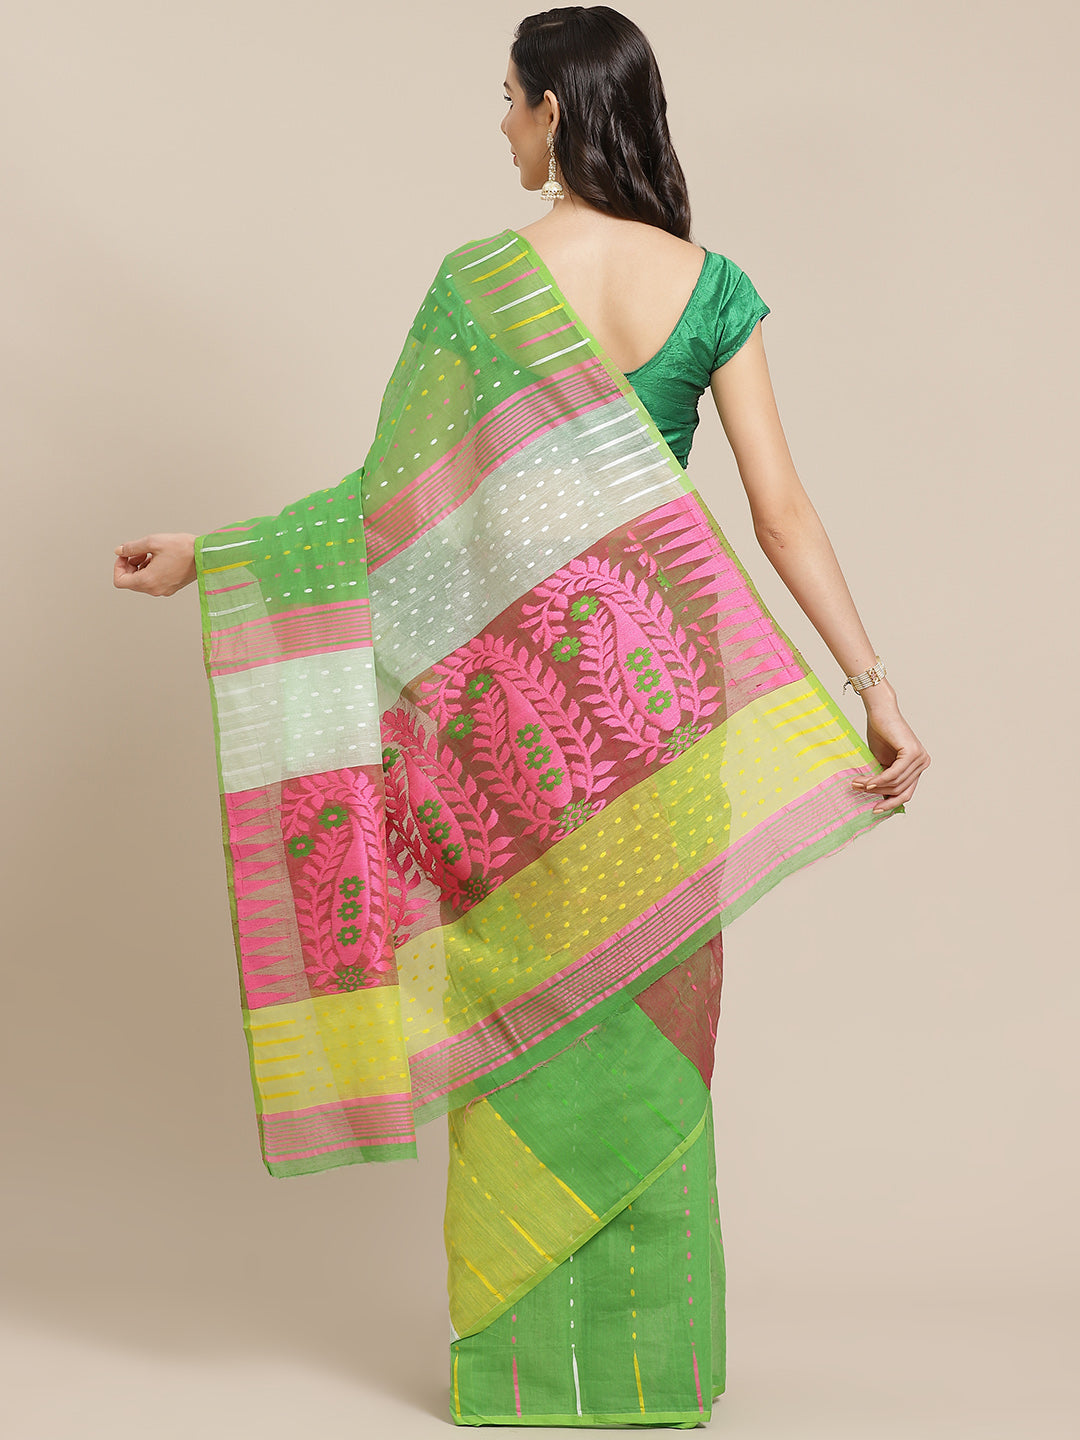 Green and Pink, Kalakari India Jamdani Silk Cotton Woven Design Saree without blouse CHBHSA0020-Saree-Kalakari India-CHBHSA0020-Bengal, Geographical Indication, Hand Crafted, Hand Painted, Heritage Prints, Jamdani, Natural Dyes, Red, Sarees, Silk Blended, Sustainable Fabrics, Woven, Yellow-[Linen,Ethnic,wear,Fashionista,Handloom,Handicraft,Indigo,blockprint,block,print,Cotton,Chanderi,Blue, latest,classy,party,bollywood,trendy,summer,style,traditional,formal,elegant,unique,style,hand,block,print